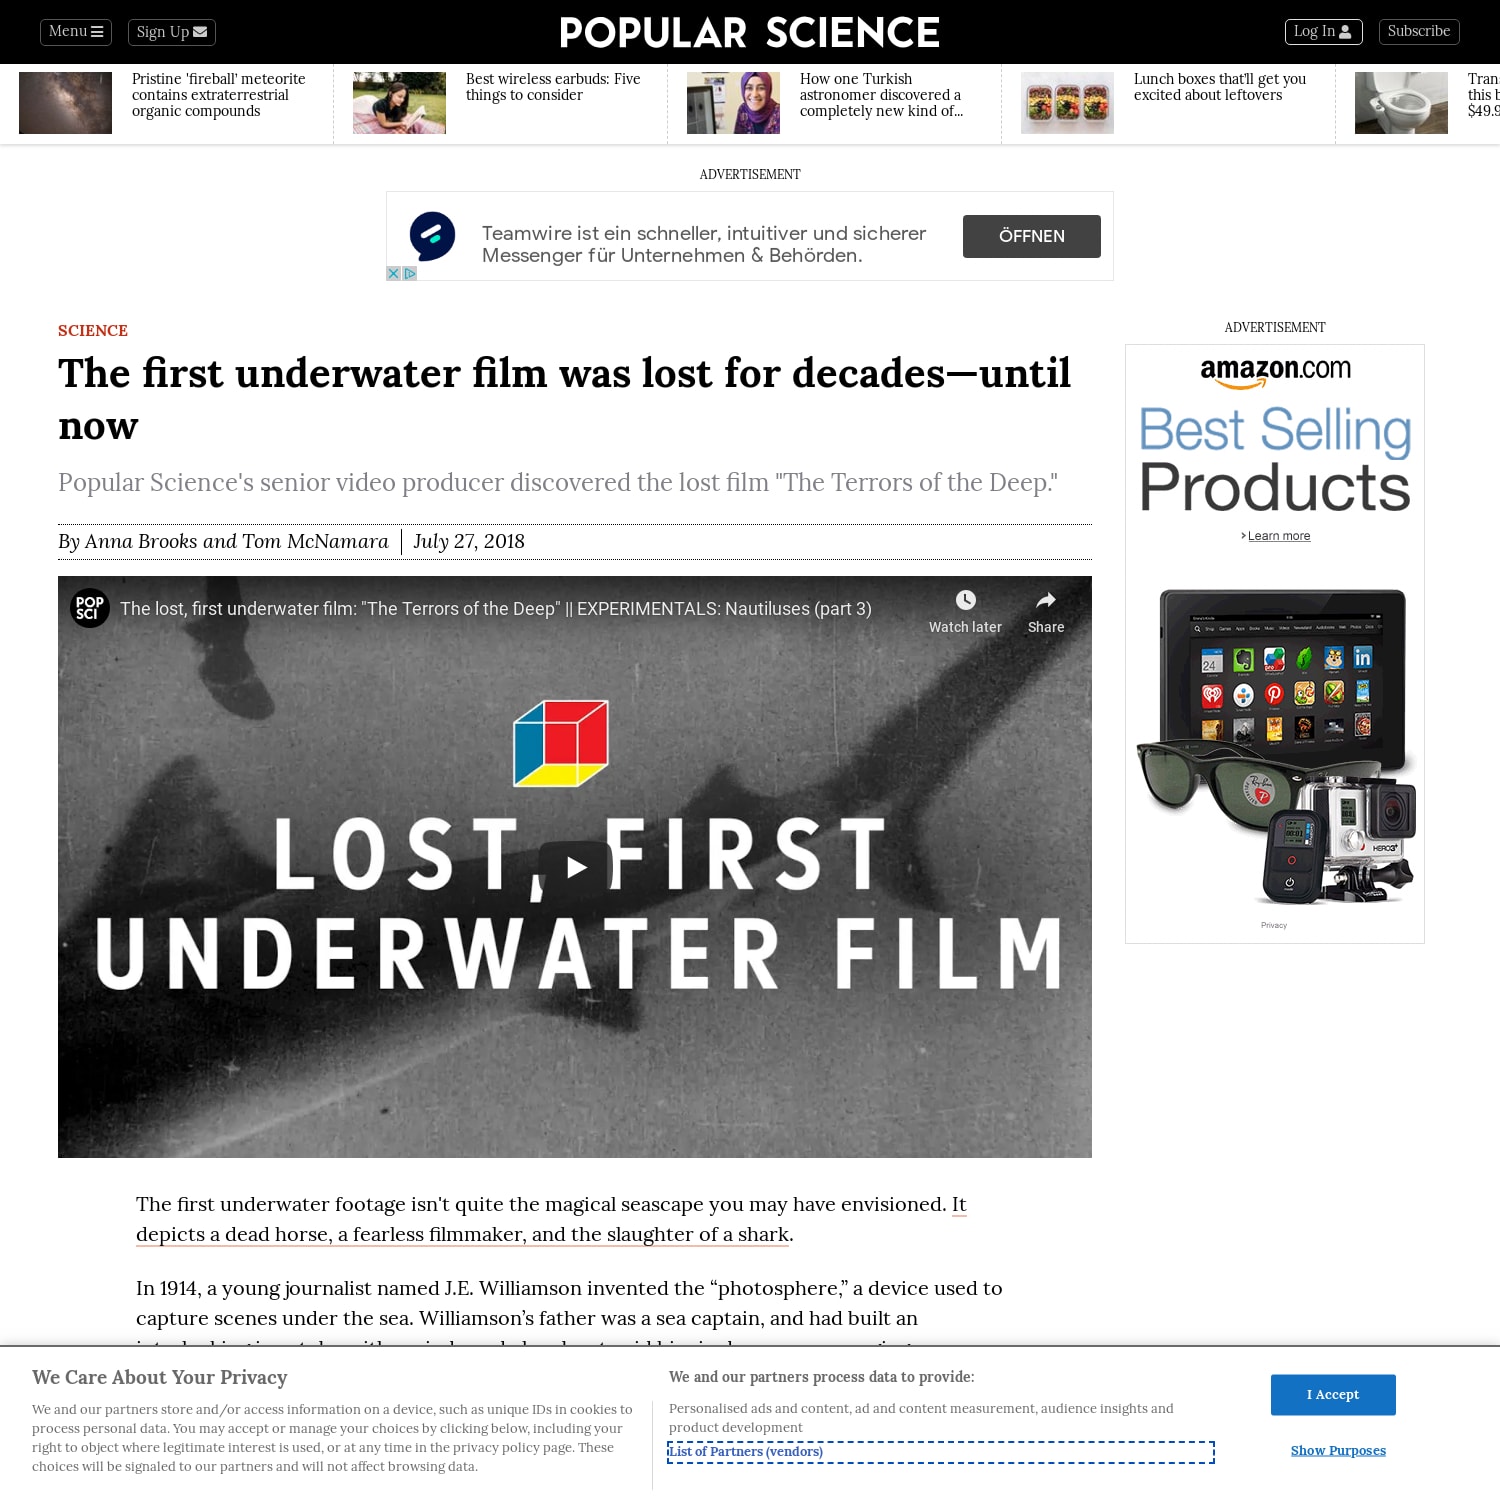 The first underwater film was lost for decades—until now